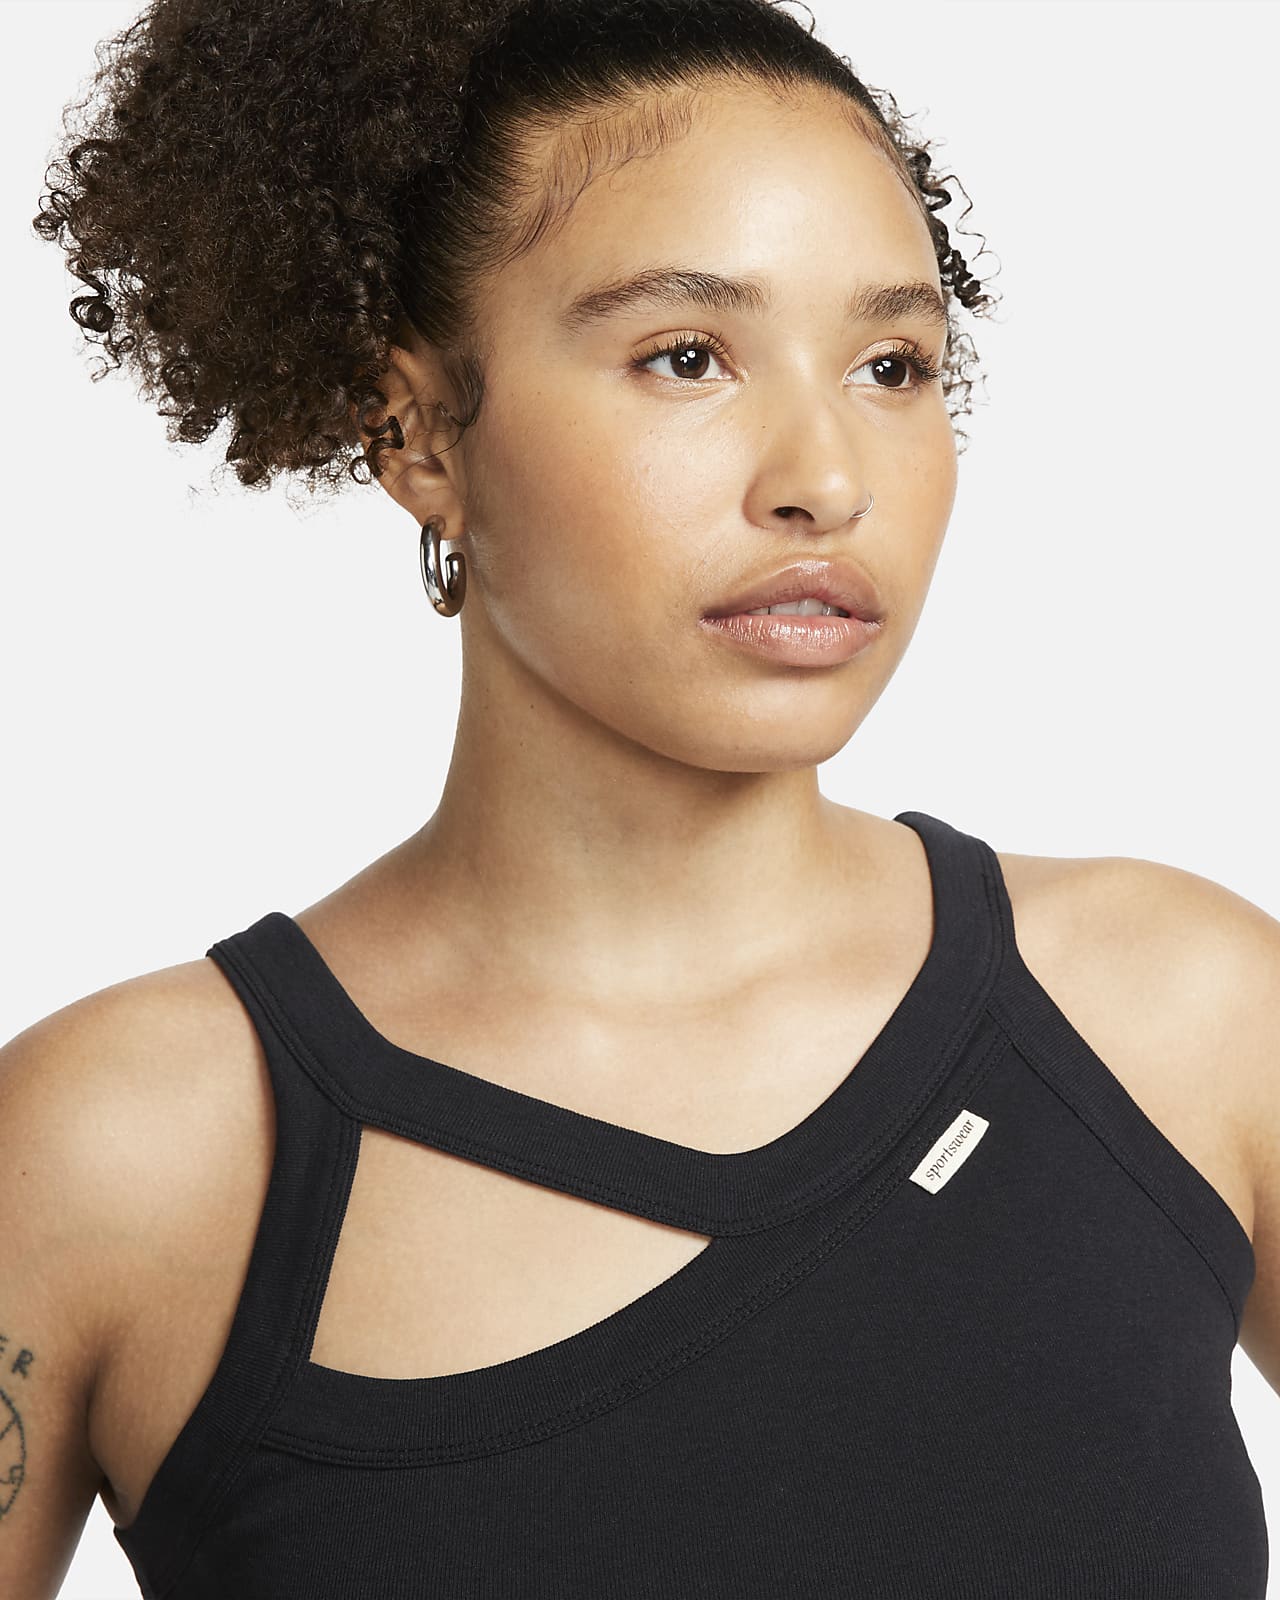 Where can i buy this tank top? : r/Nike